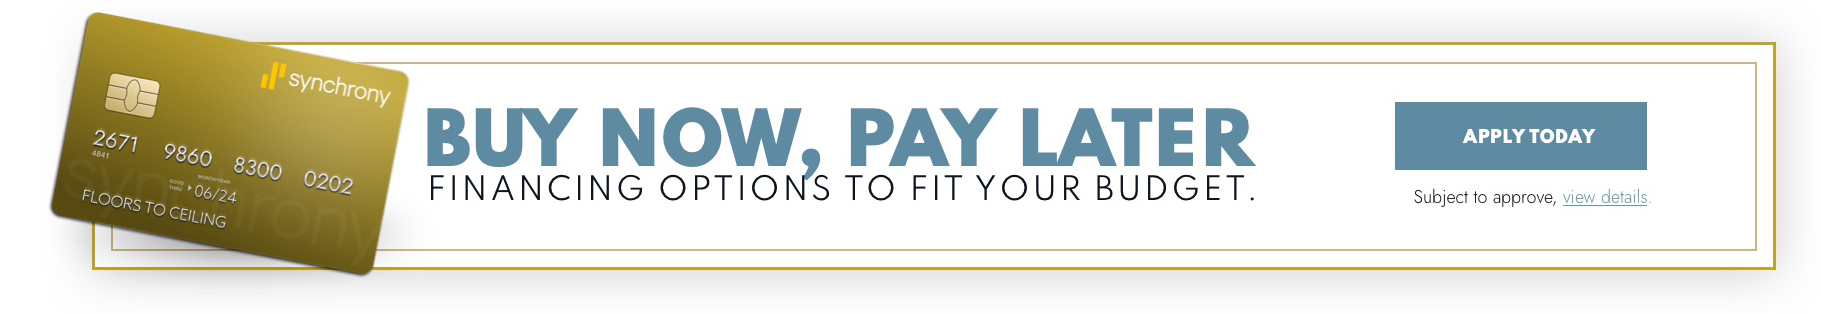 Buy Now Pay Later Financing options to fit your budget | Floor to Ceiling Sycamore